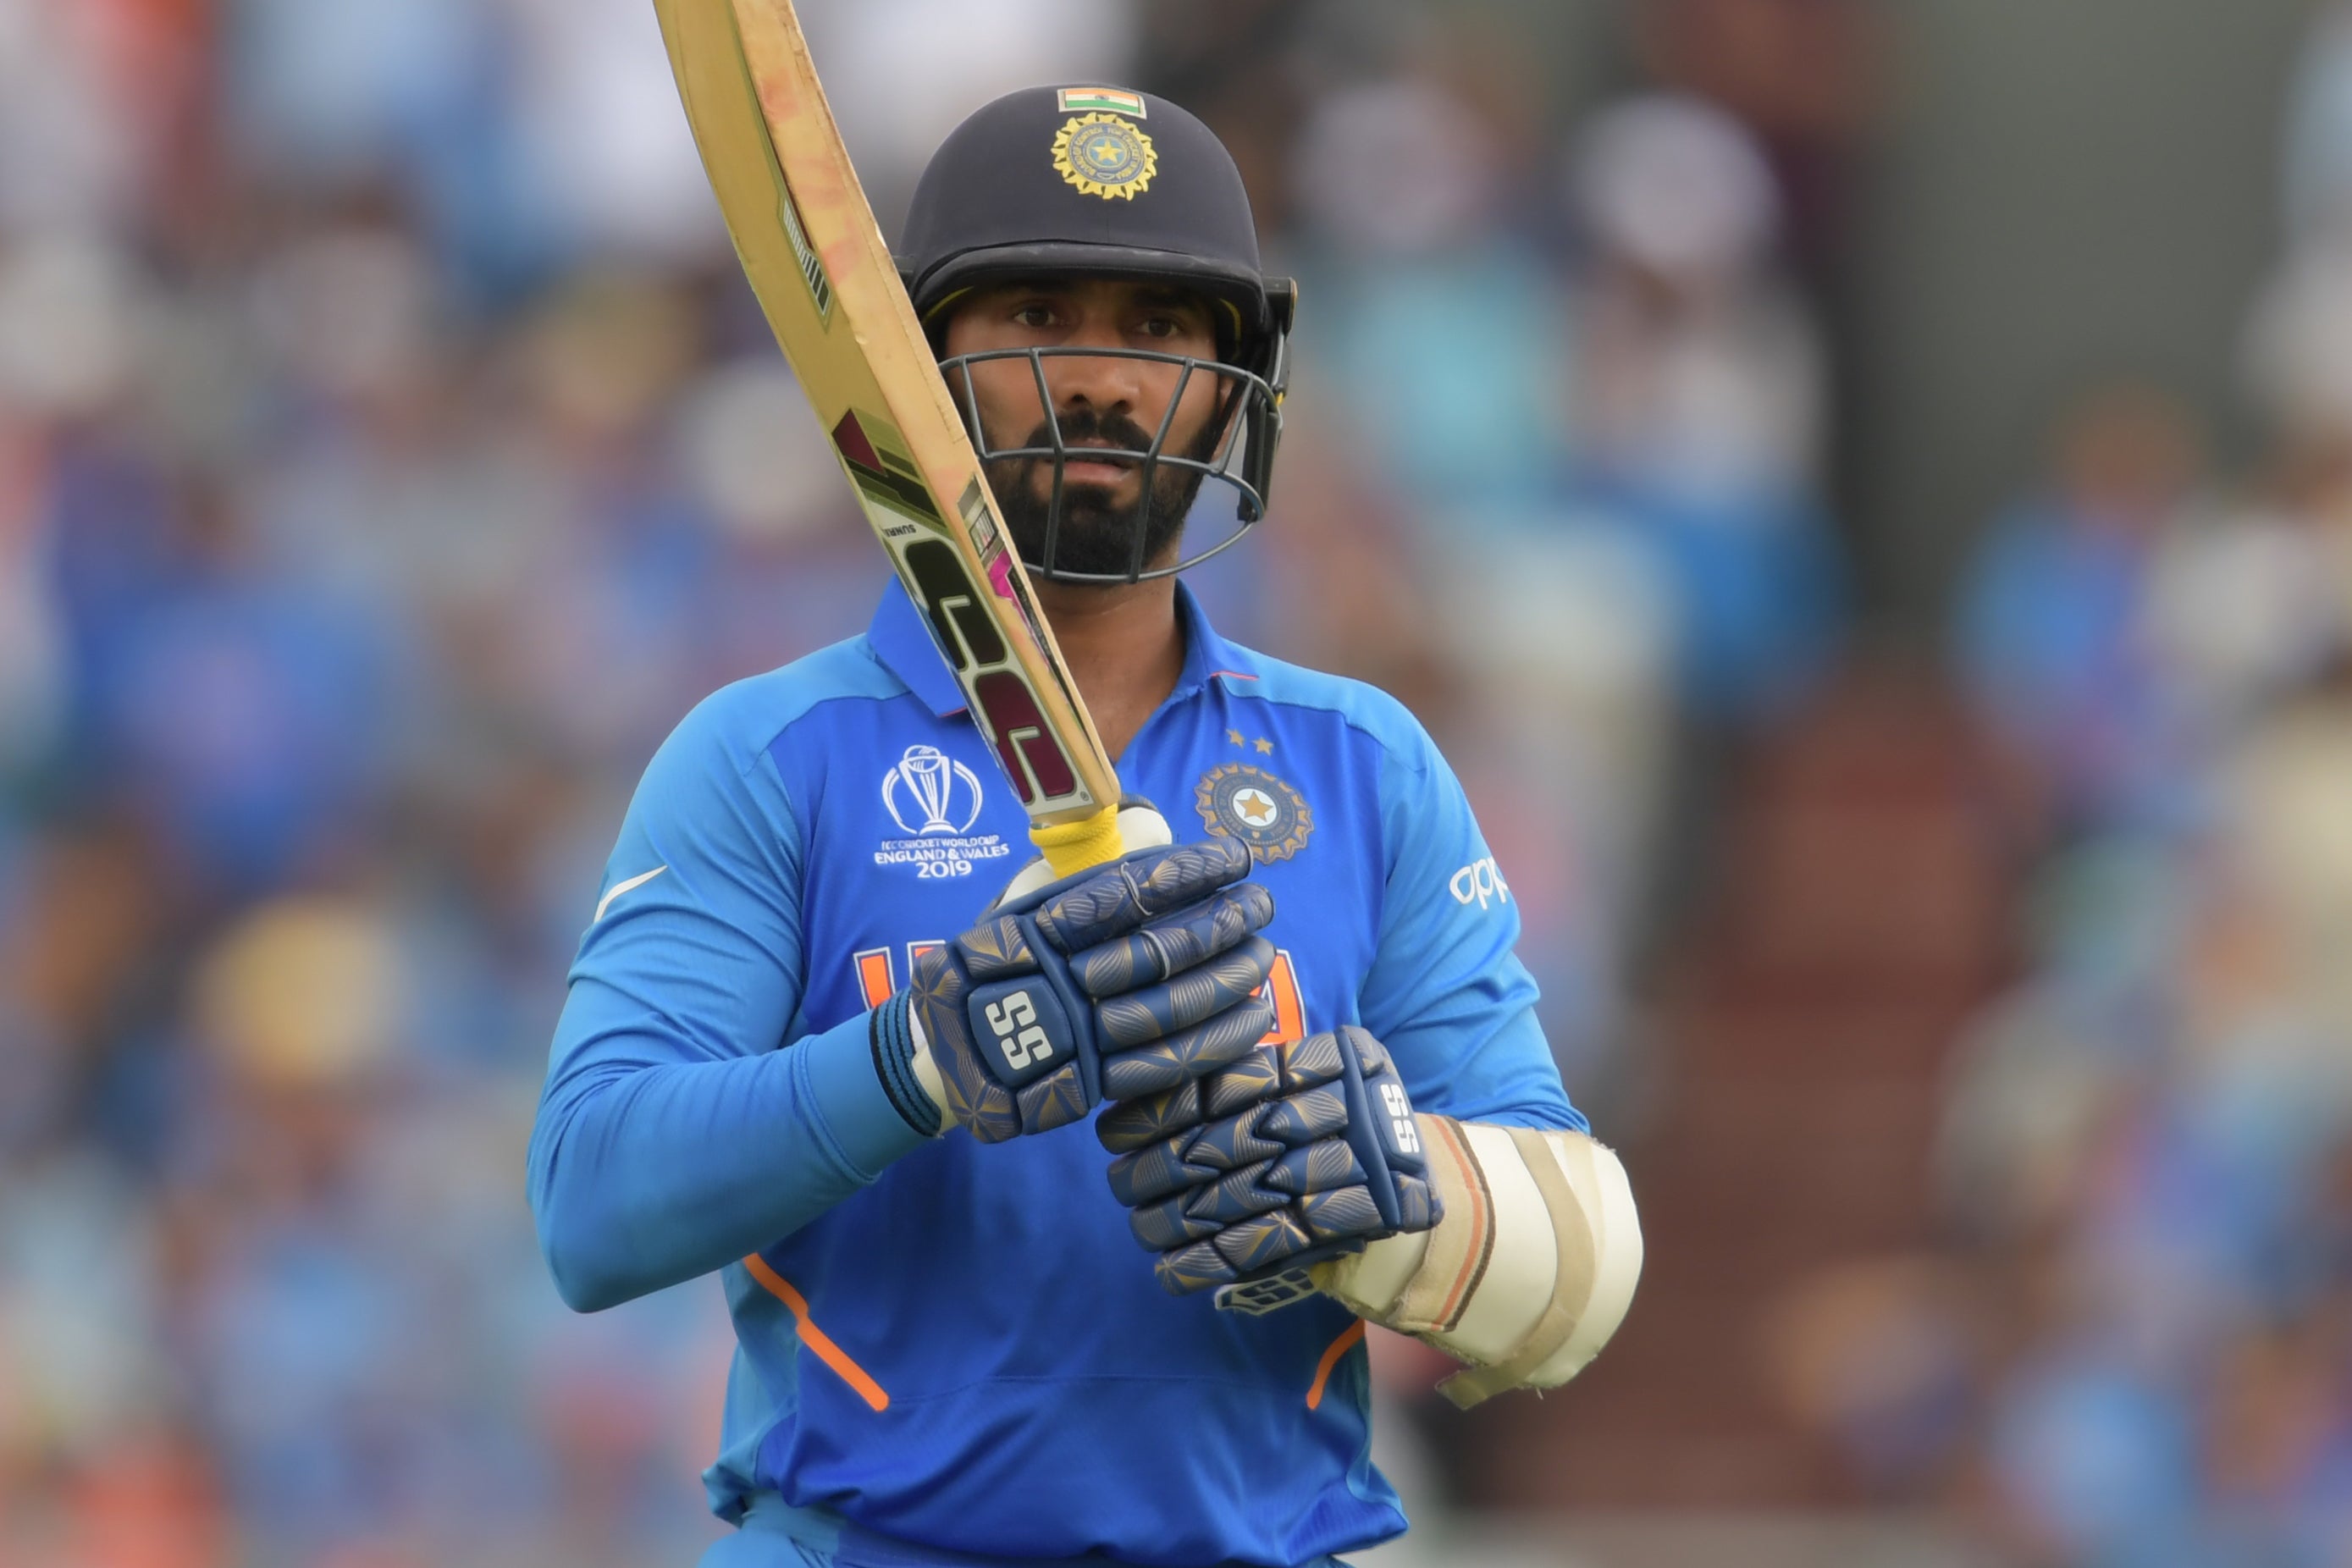 File: India's Dinesh Karthik is seen during the 2019 Cricket World Cup first semi-final between New Zealand and India at Old Trafford in Manchester, on 10 July 10 2019. Karthik was criticised for comments comparing a bat to a neighbour’s wife during the England vs Sri Lanka match